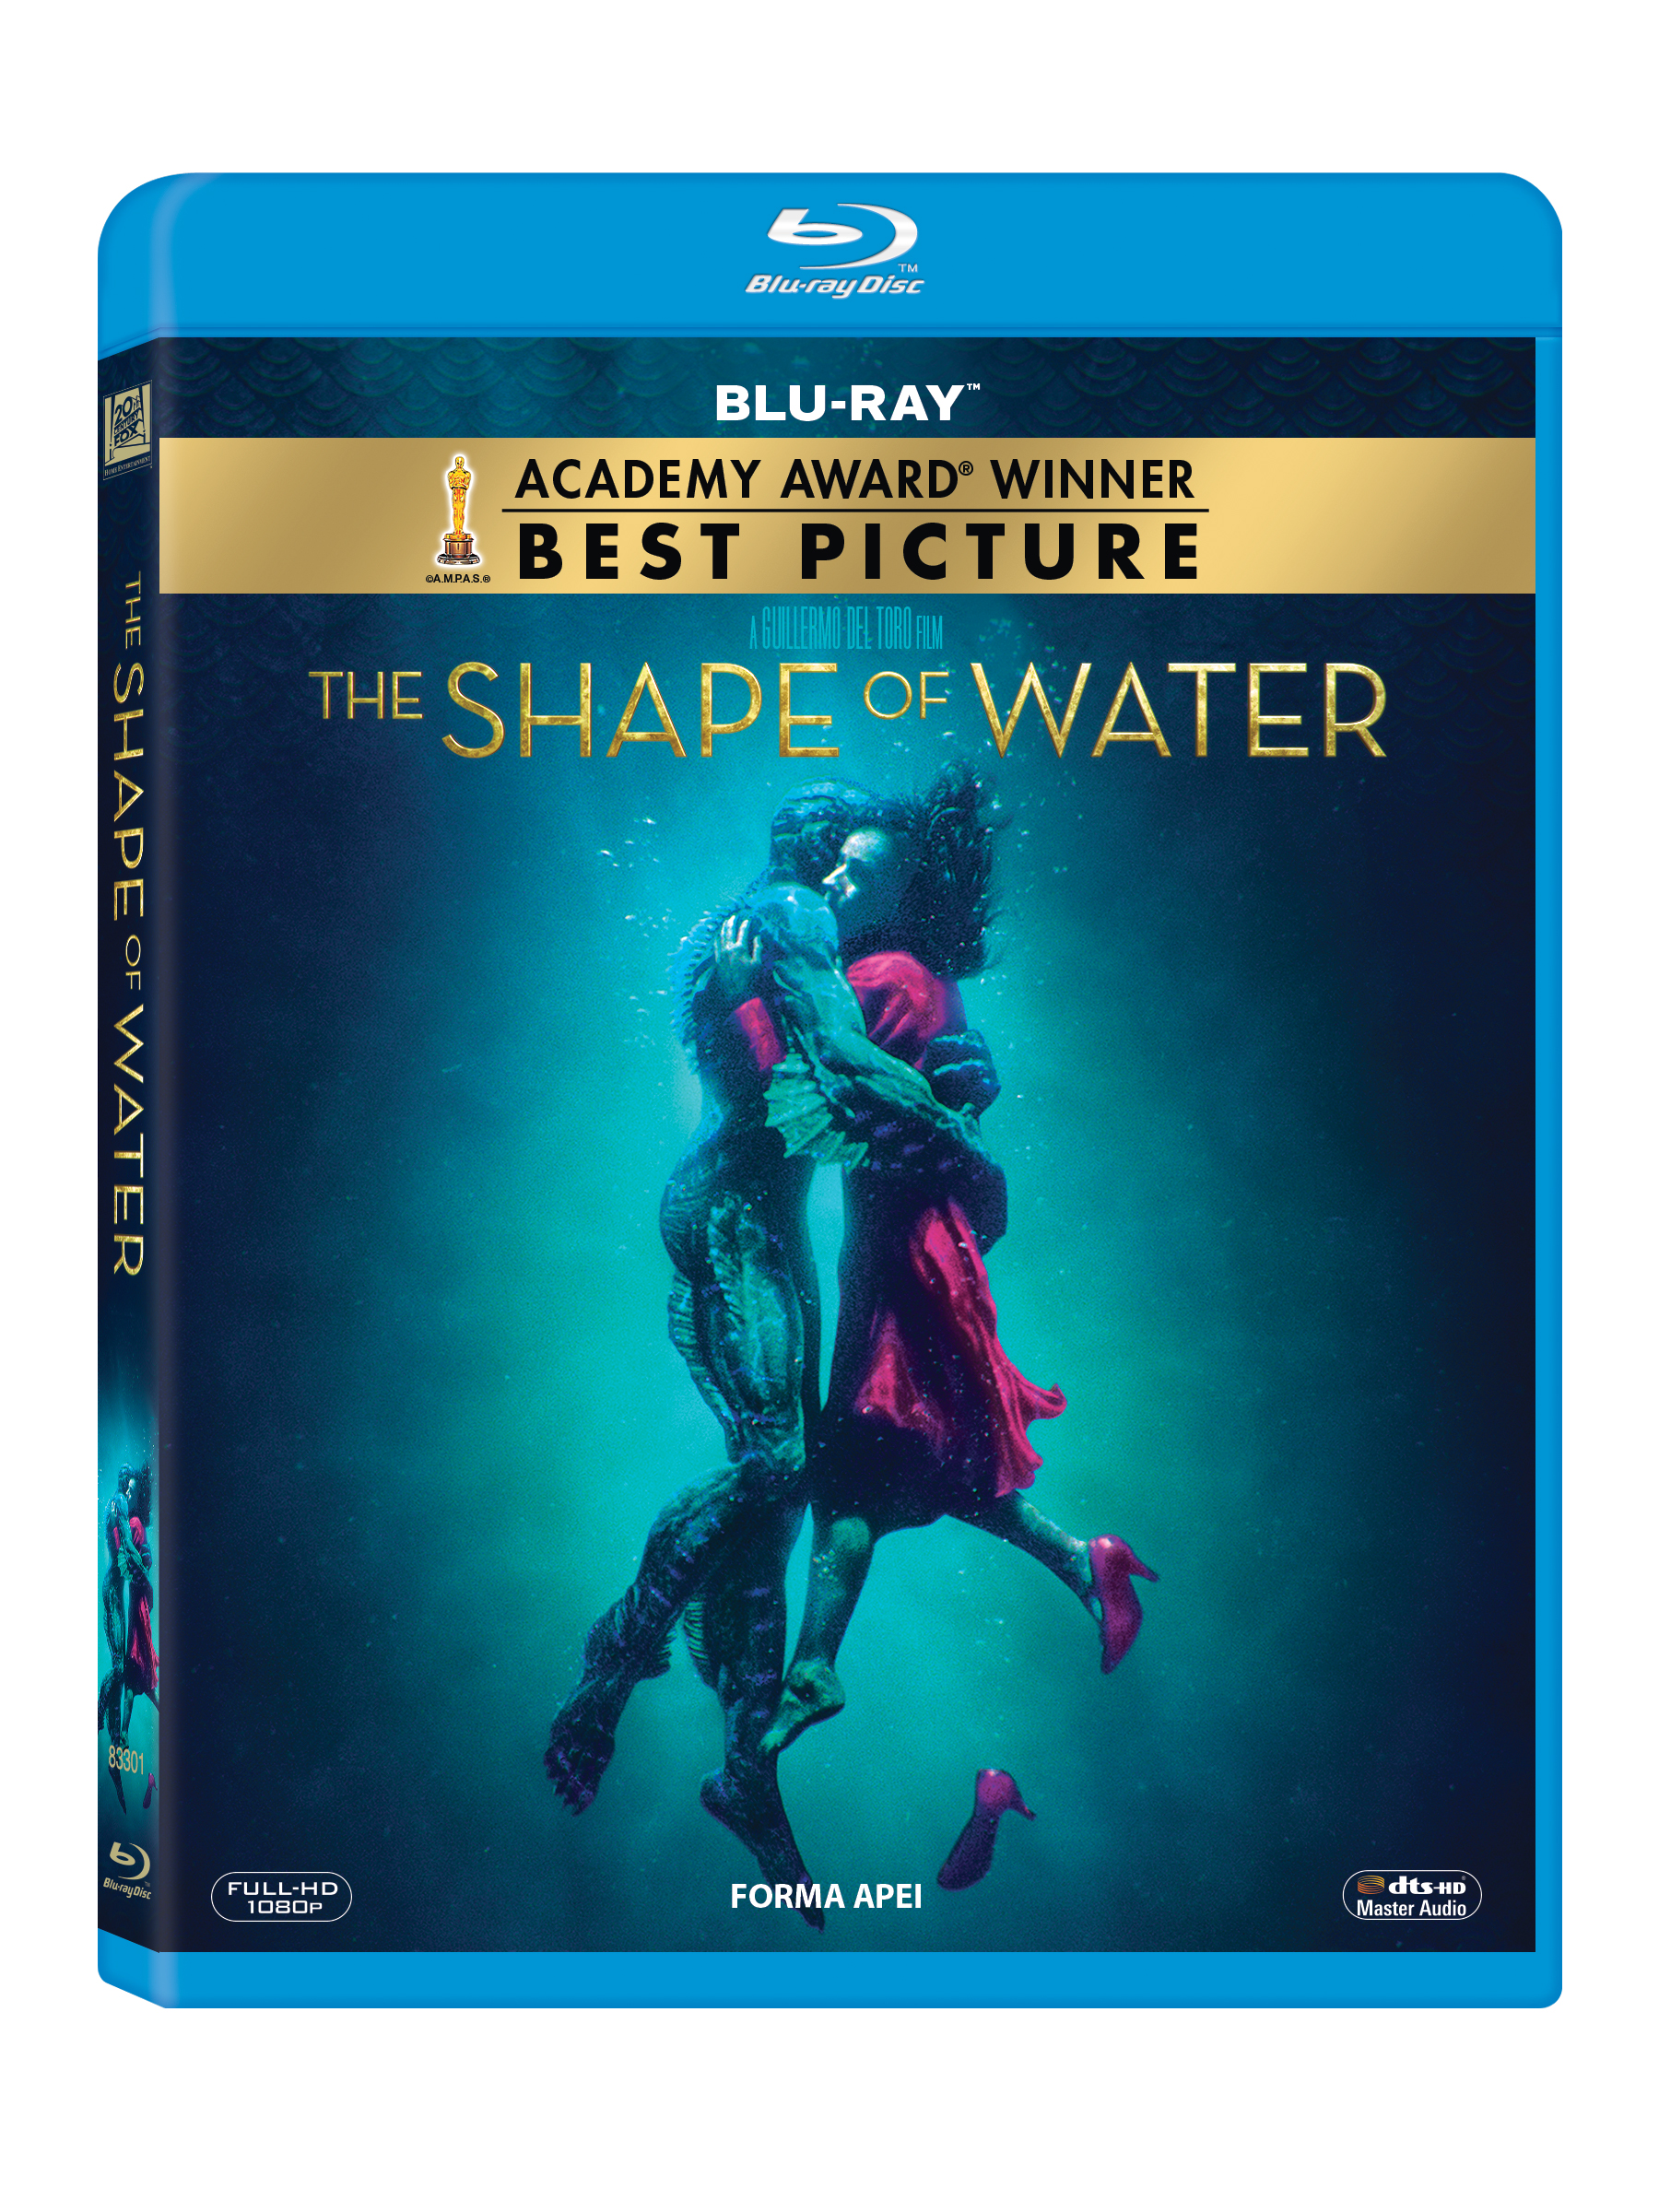 Forma apei (Blu Ray Disc) / The Shape of Water 